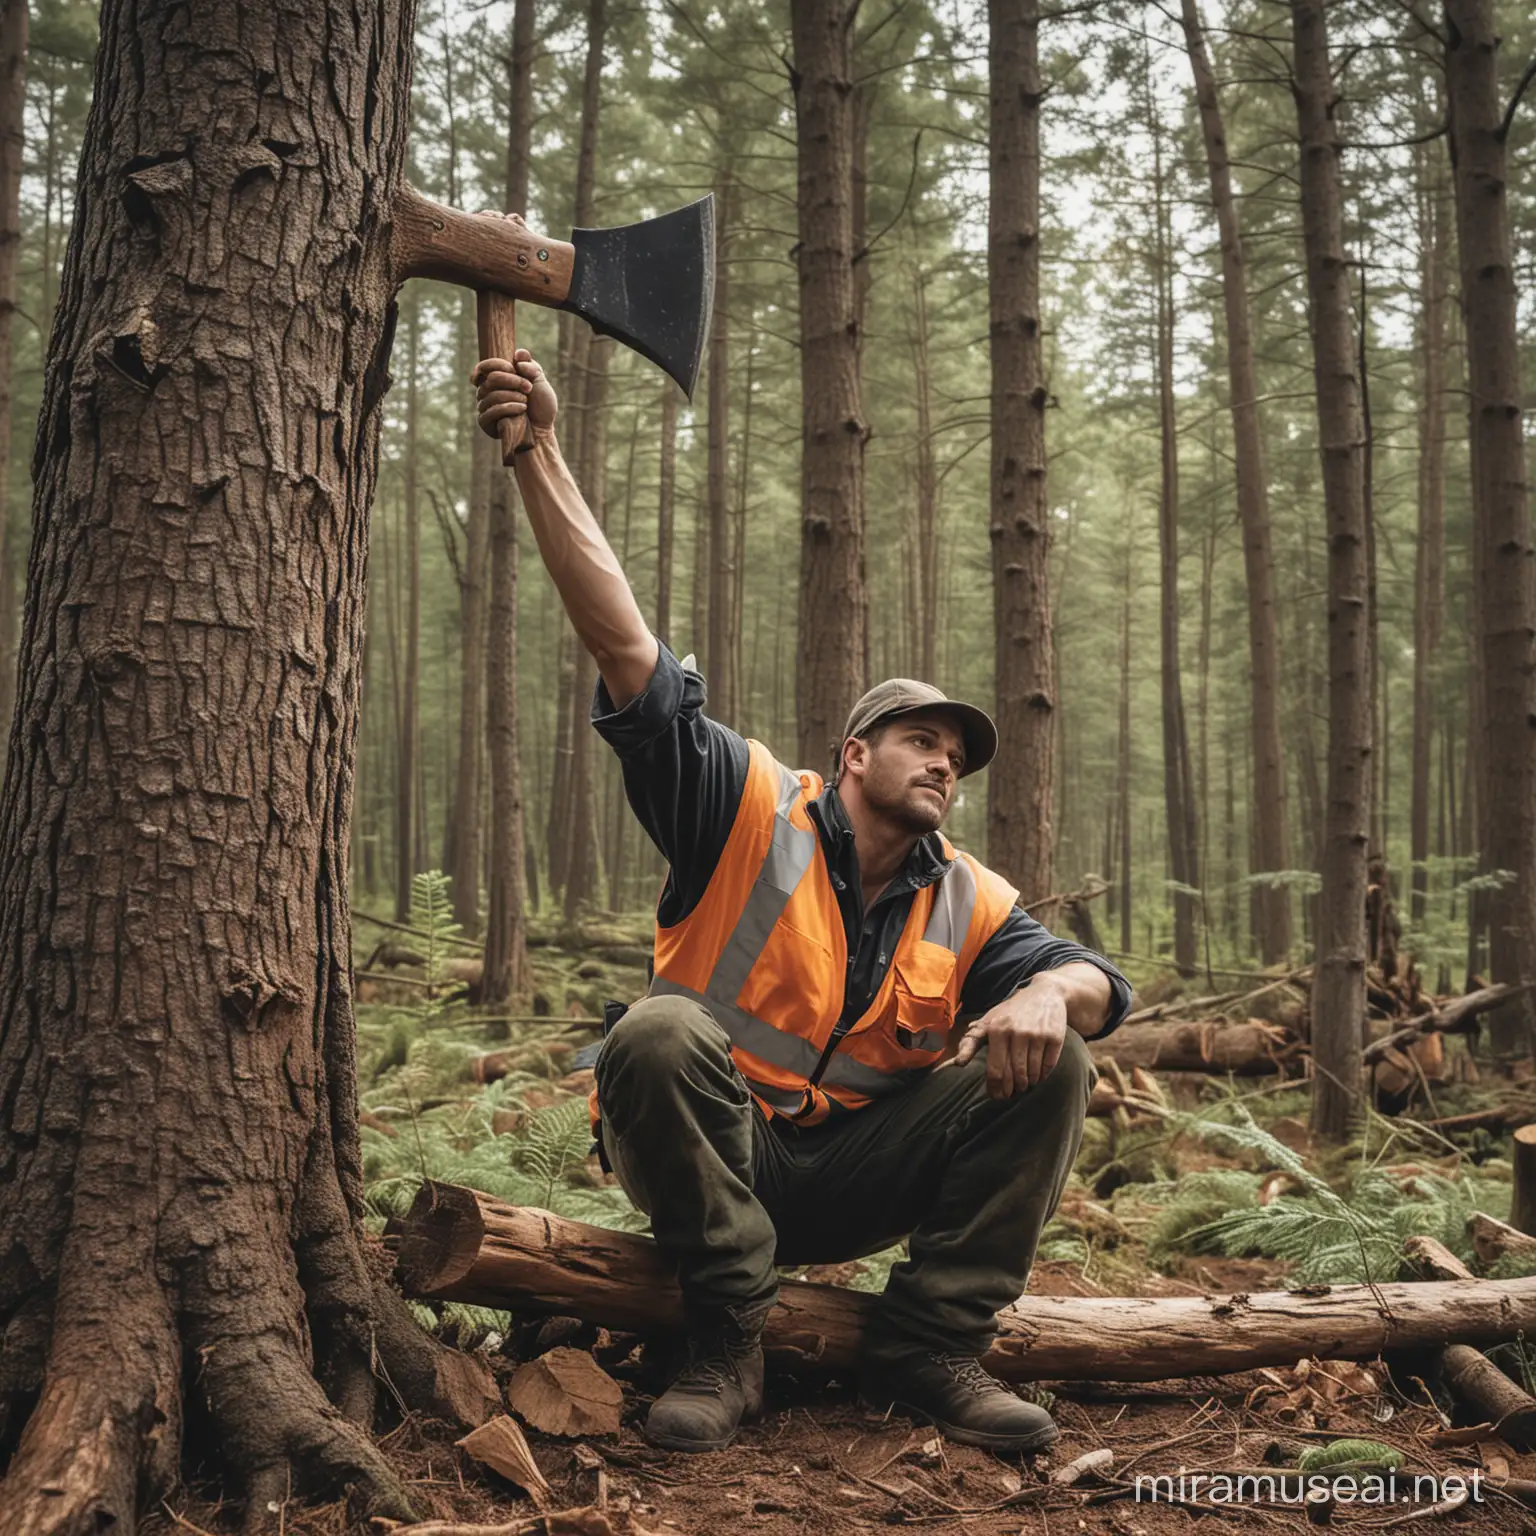 Generate the photo of a forest worker with two hands above shoulder level holding an axe  to fell a tree , and seated with a straight back.
